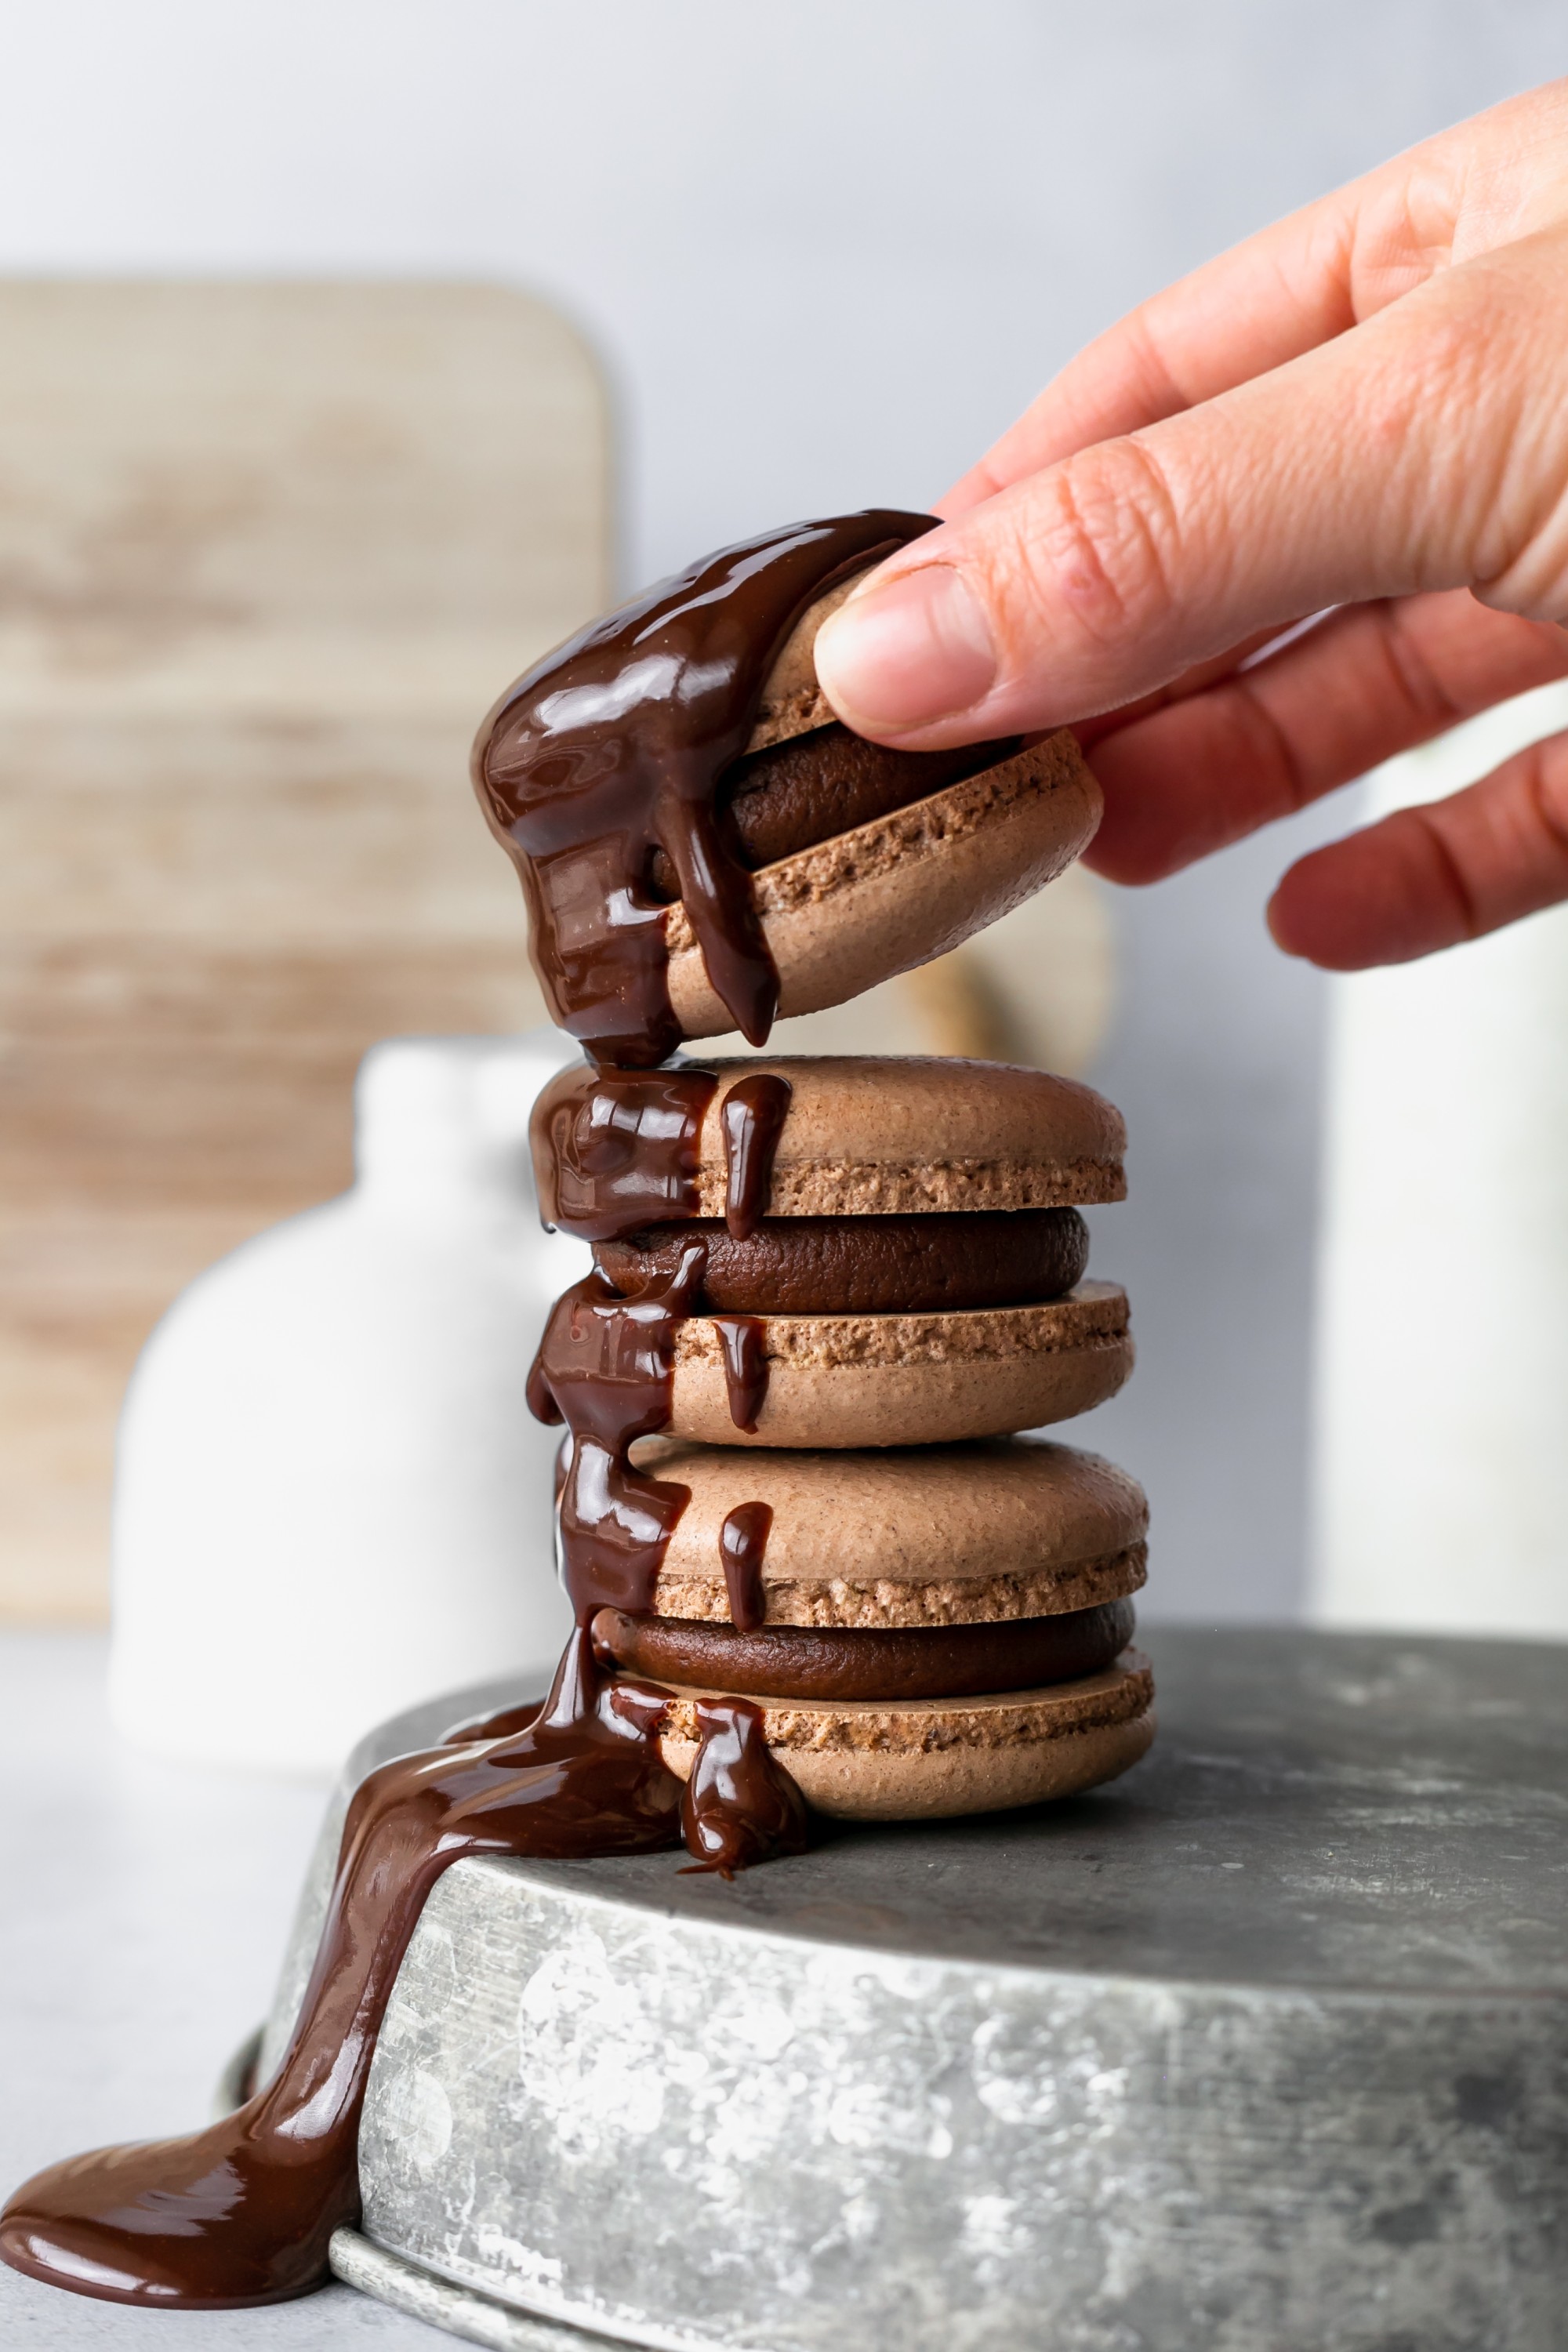 https://thewhitewhisk.com/wp-content/uploads/2023/03/Chocolate-Macarons-07.jpg